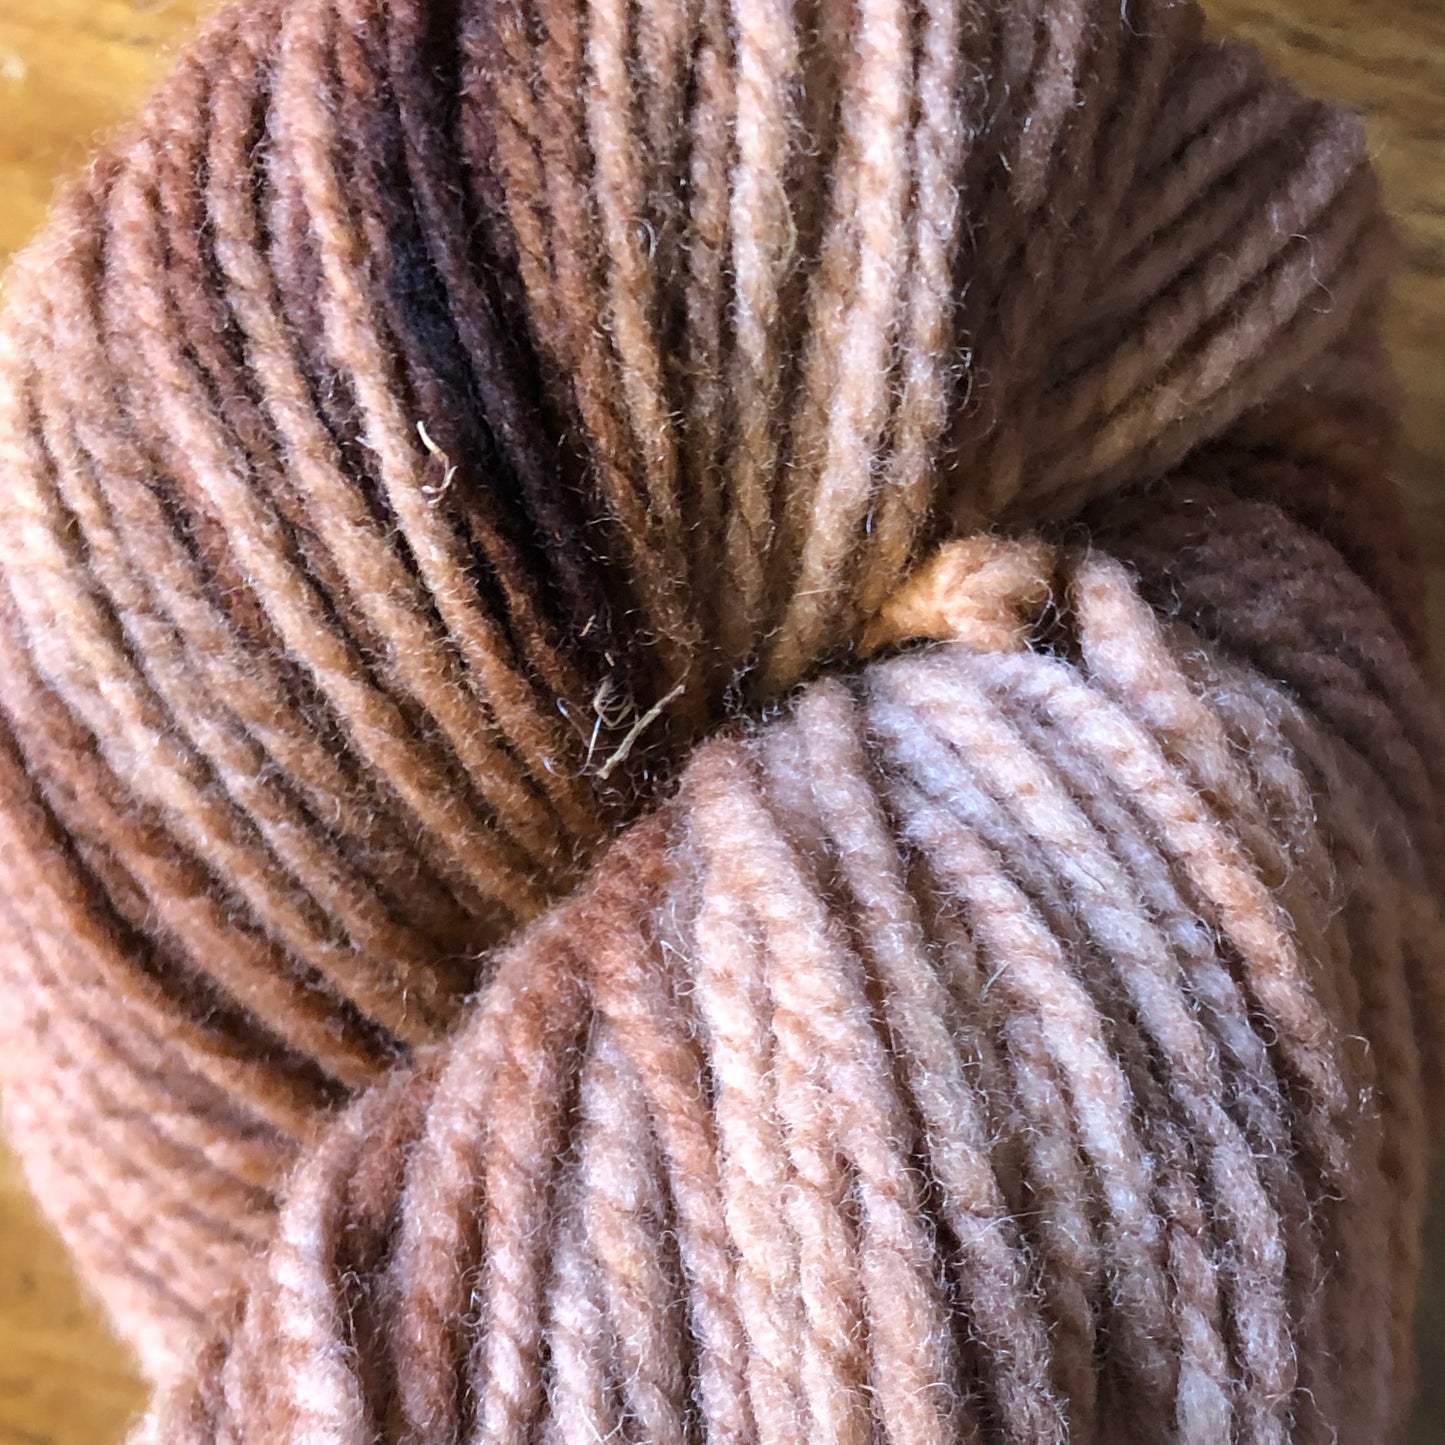 Worsted Weight (4) Yarn, 100% Wool, Hand Dyed "Pumpkin Spice" Colourway